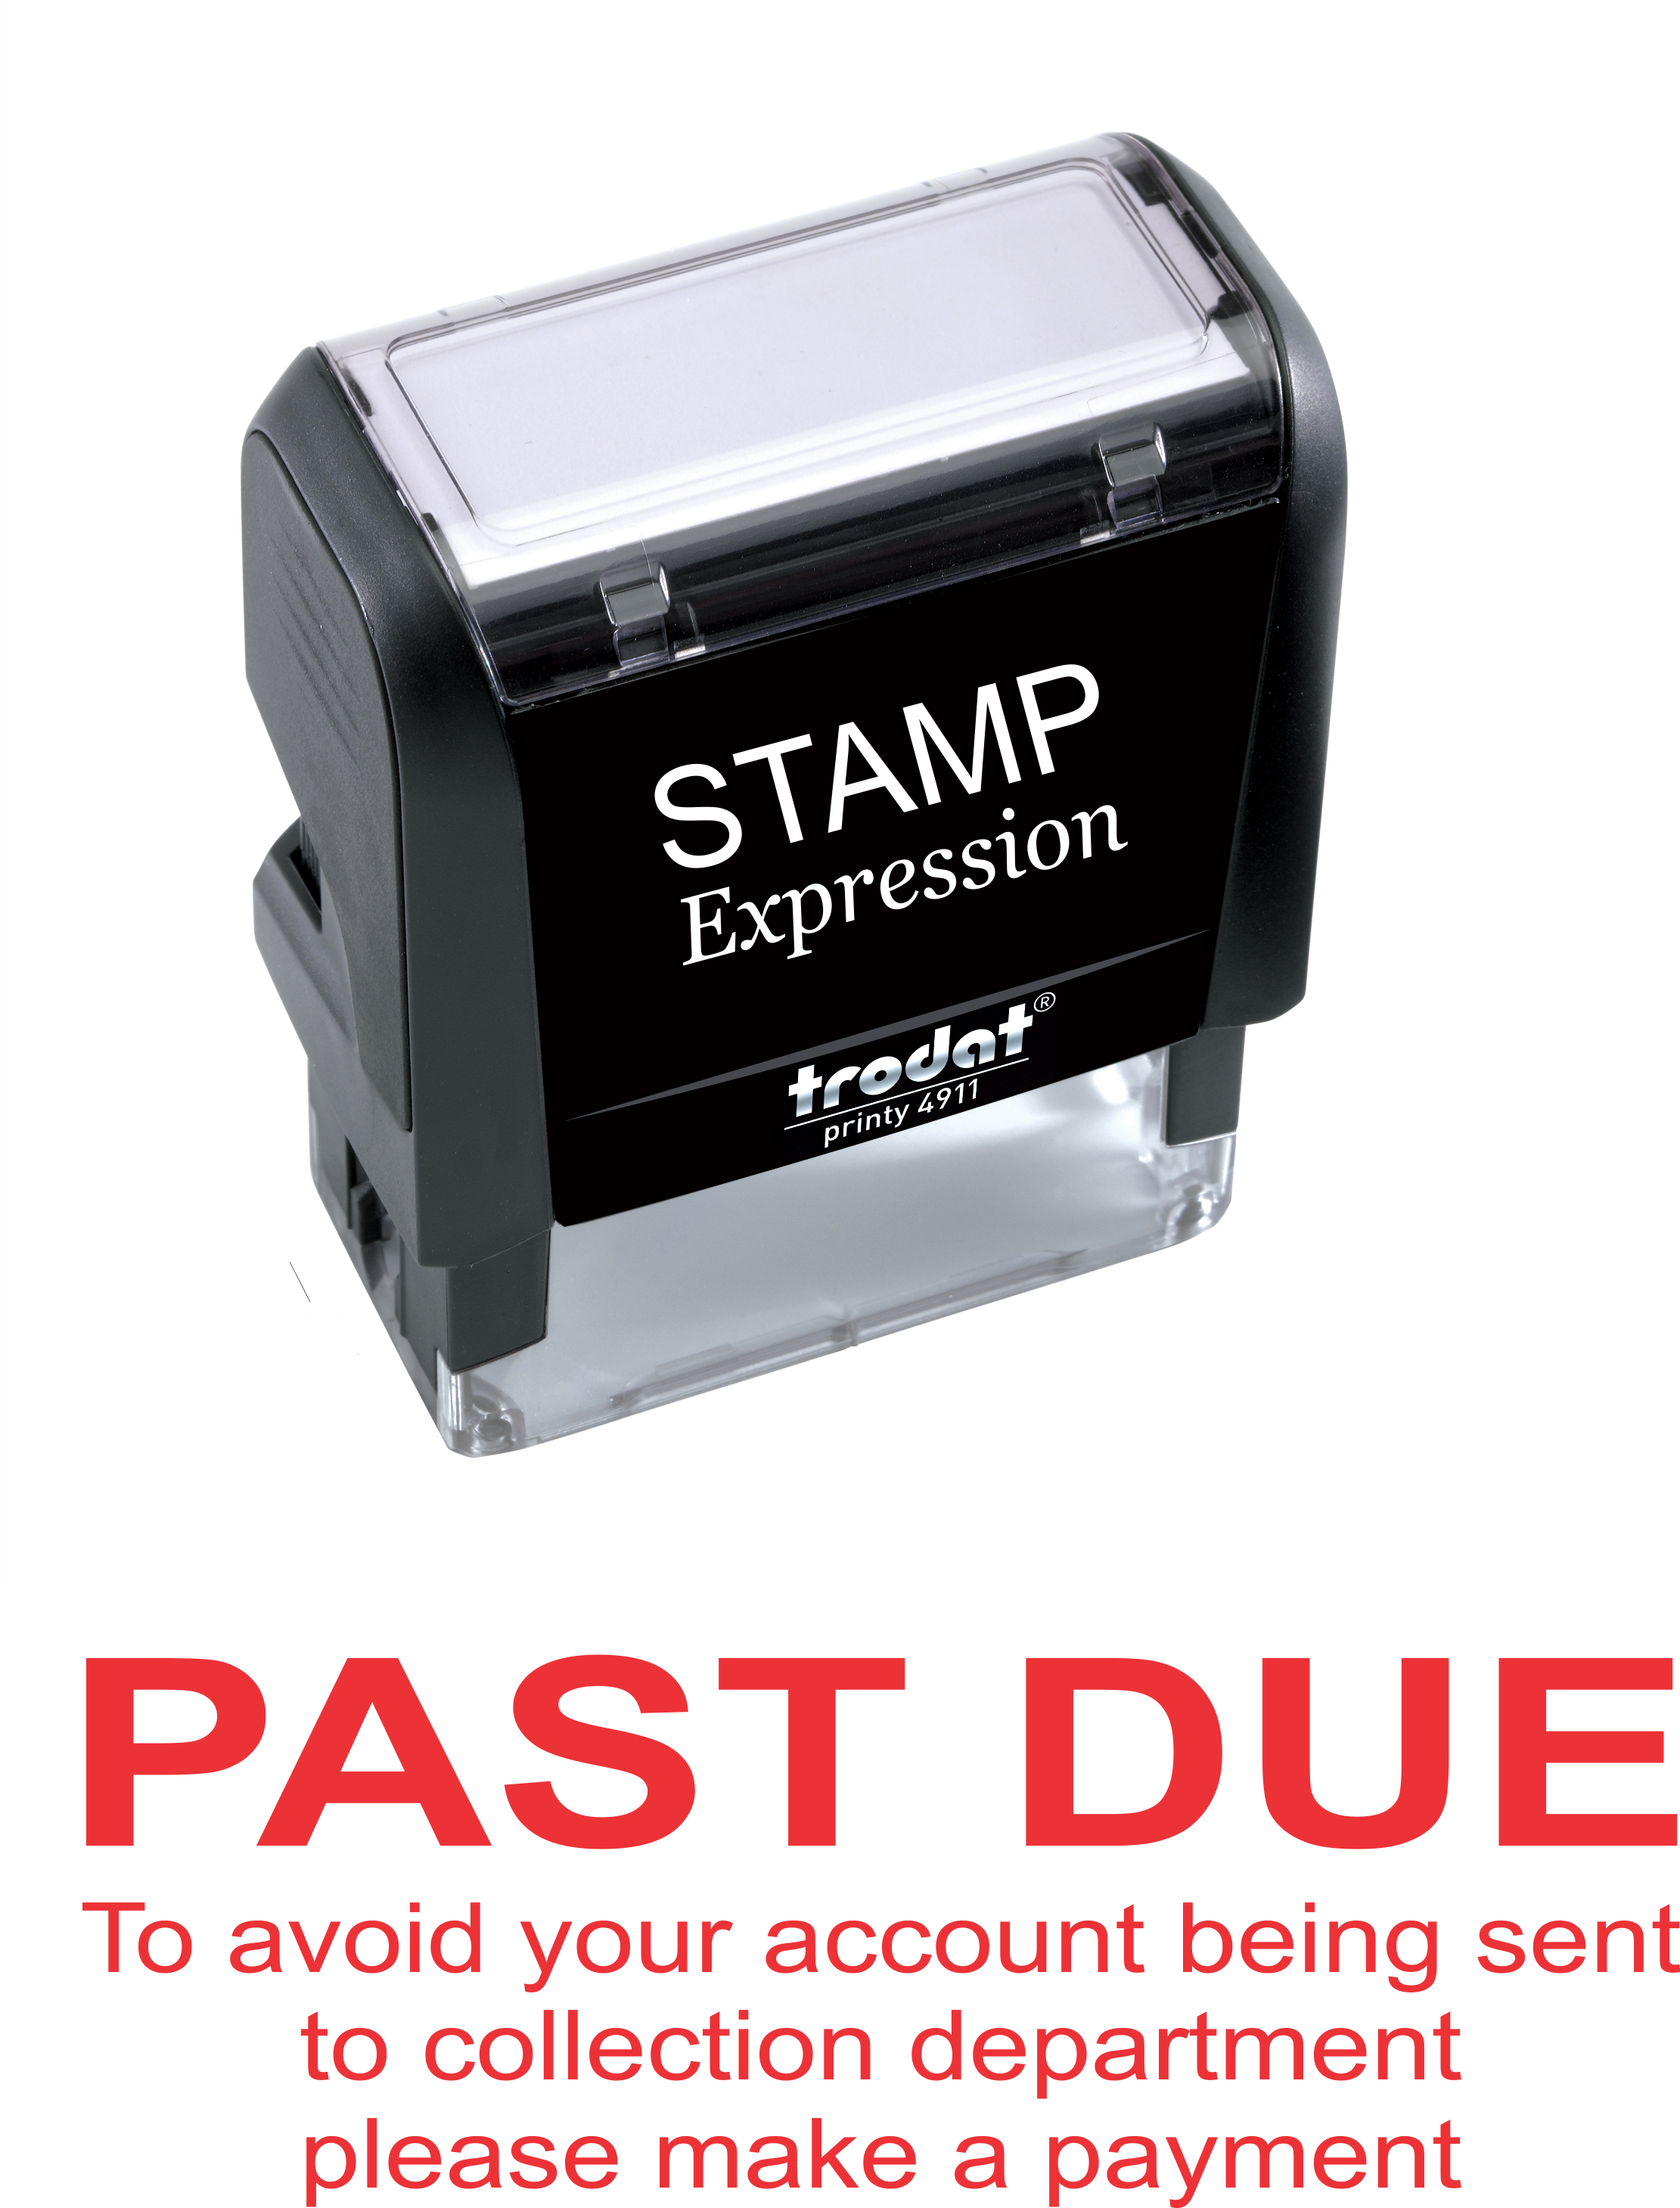 Past Due Avoid Account Being Sent to Collection Office Self Inking Rubber Stamp